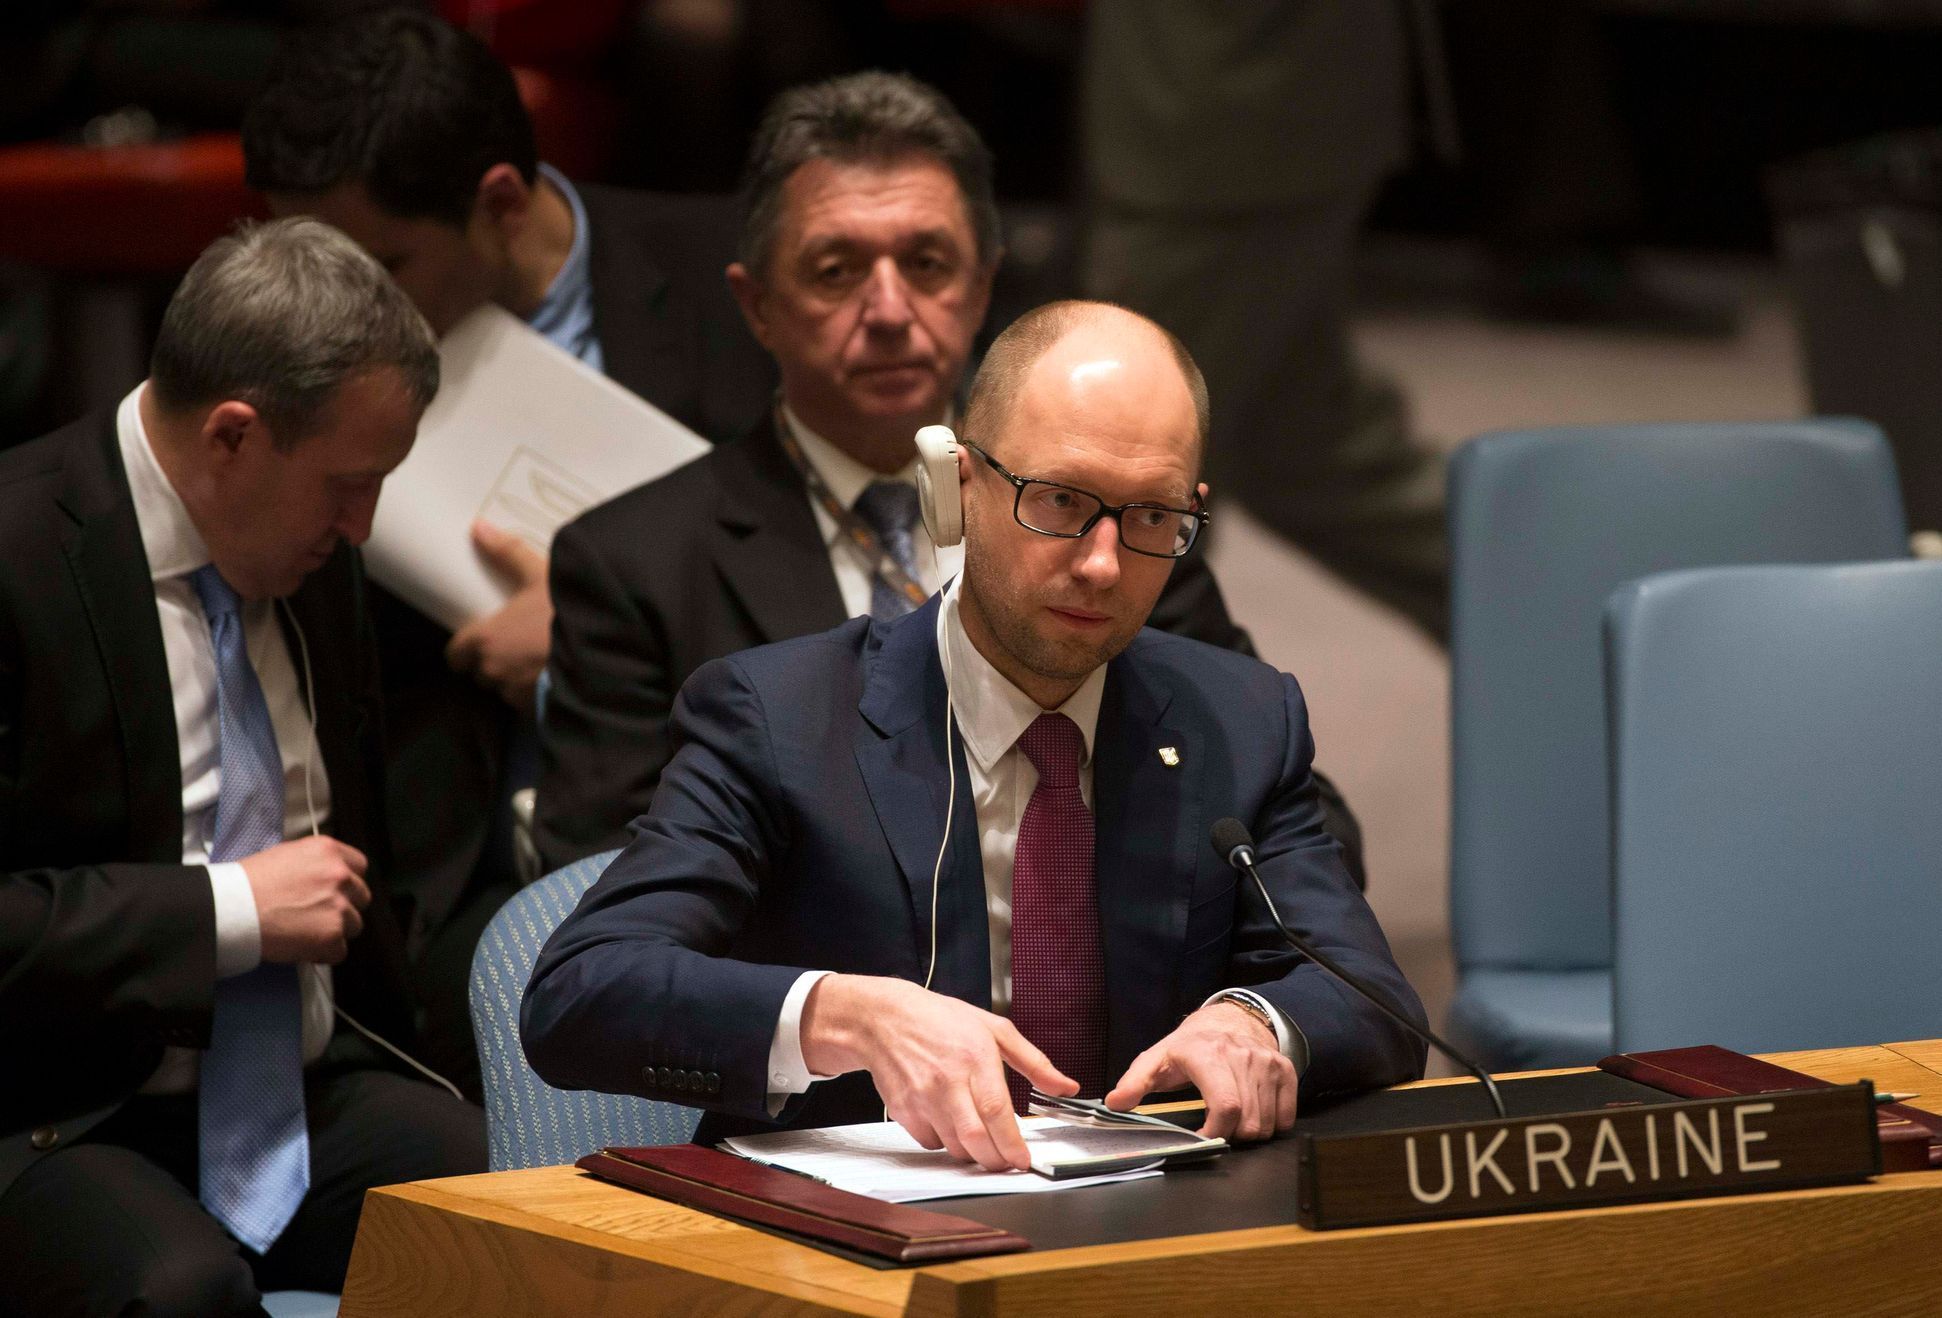 Ukraine Prime Minister Arseniy Yatsenyuk attends a meeting of the United Nations Security Council on the crisis in Ukraine, at U.N. Headquarters in New York